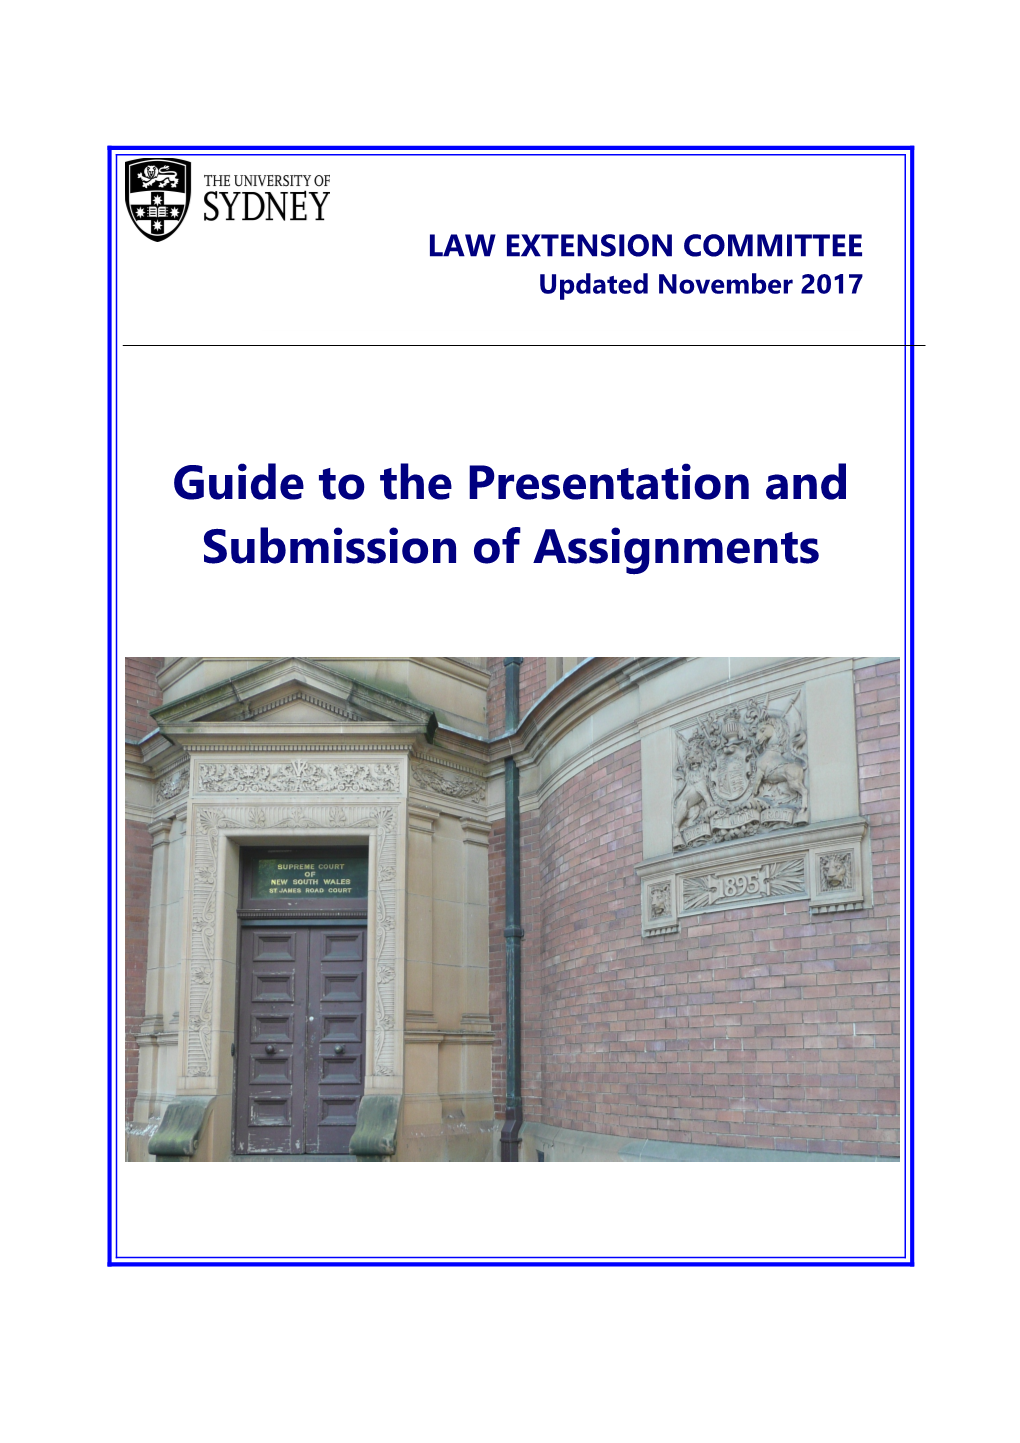 Presentation and Submission of Assignments